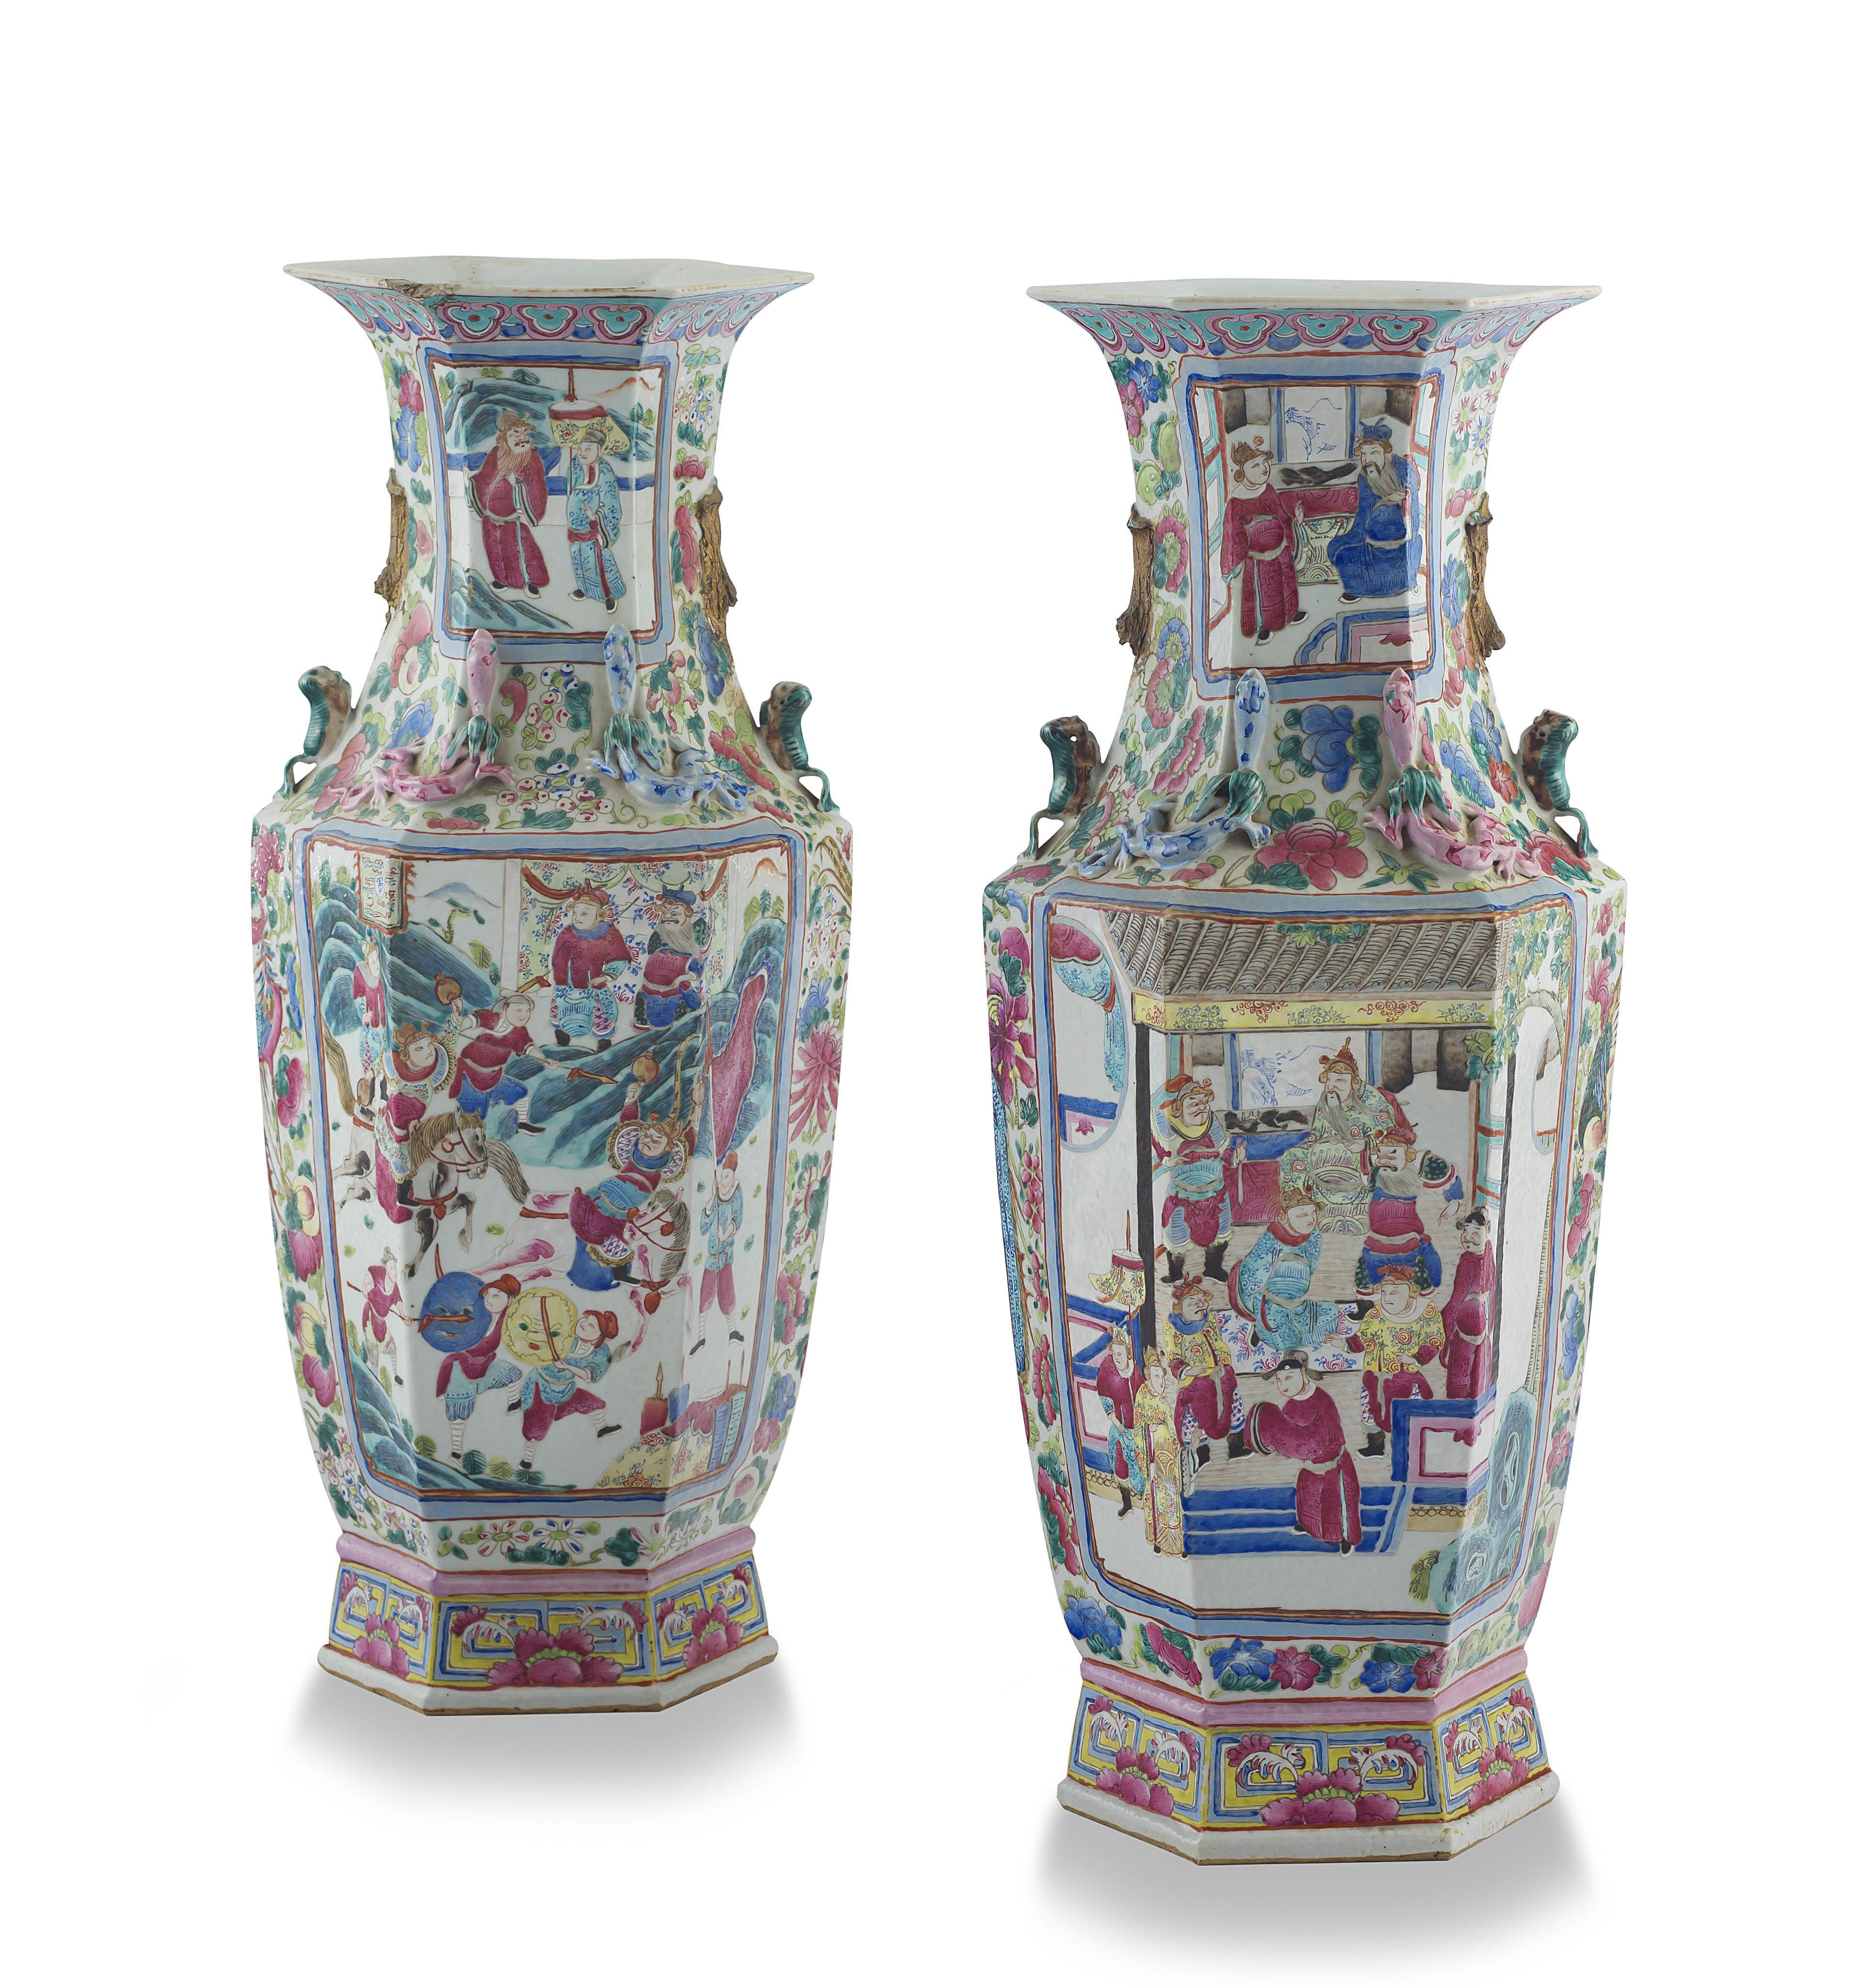 A pair of Chinese famille-rose vases, Qing Dynasty, 19th century